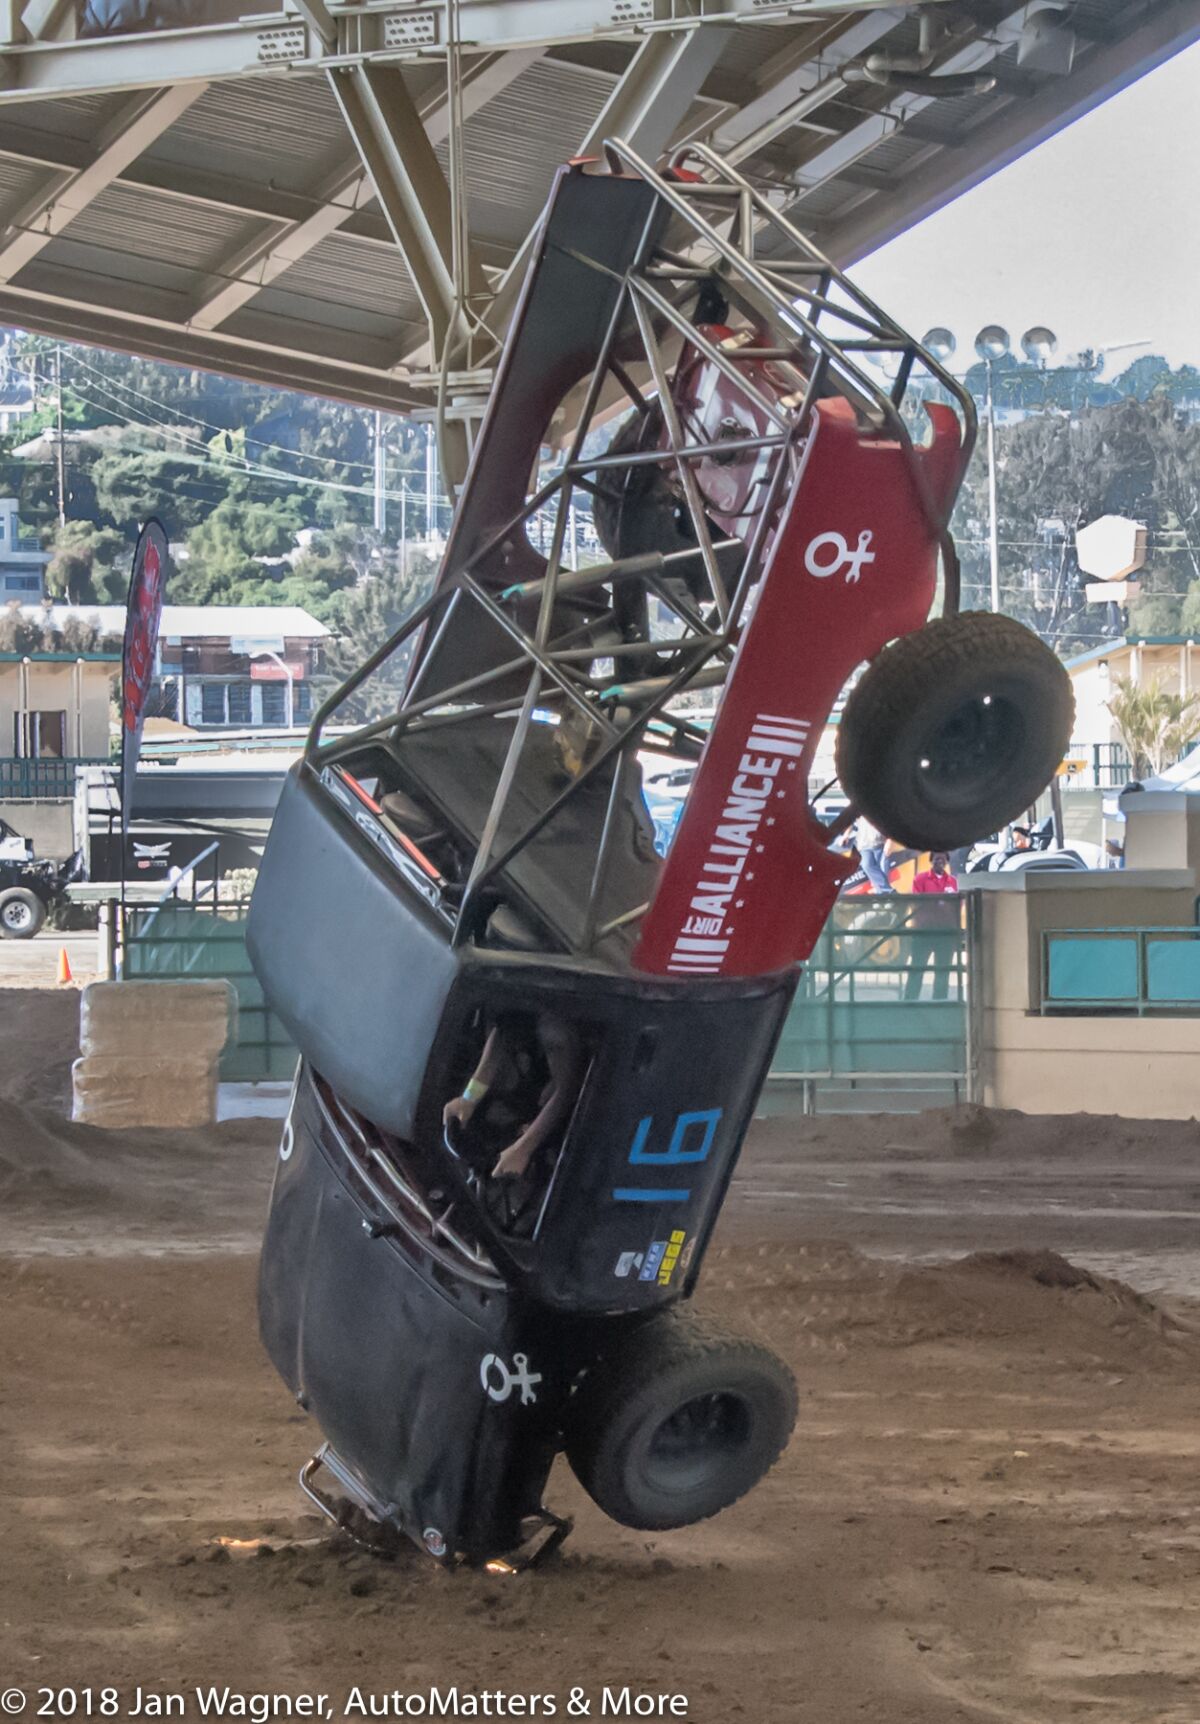 Motorsports competition at the 2018 San Diego County Fair